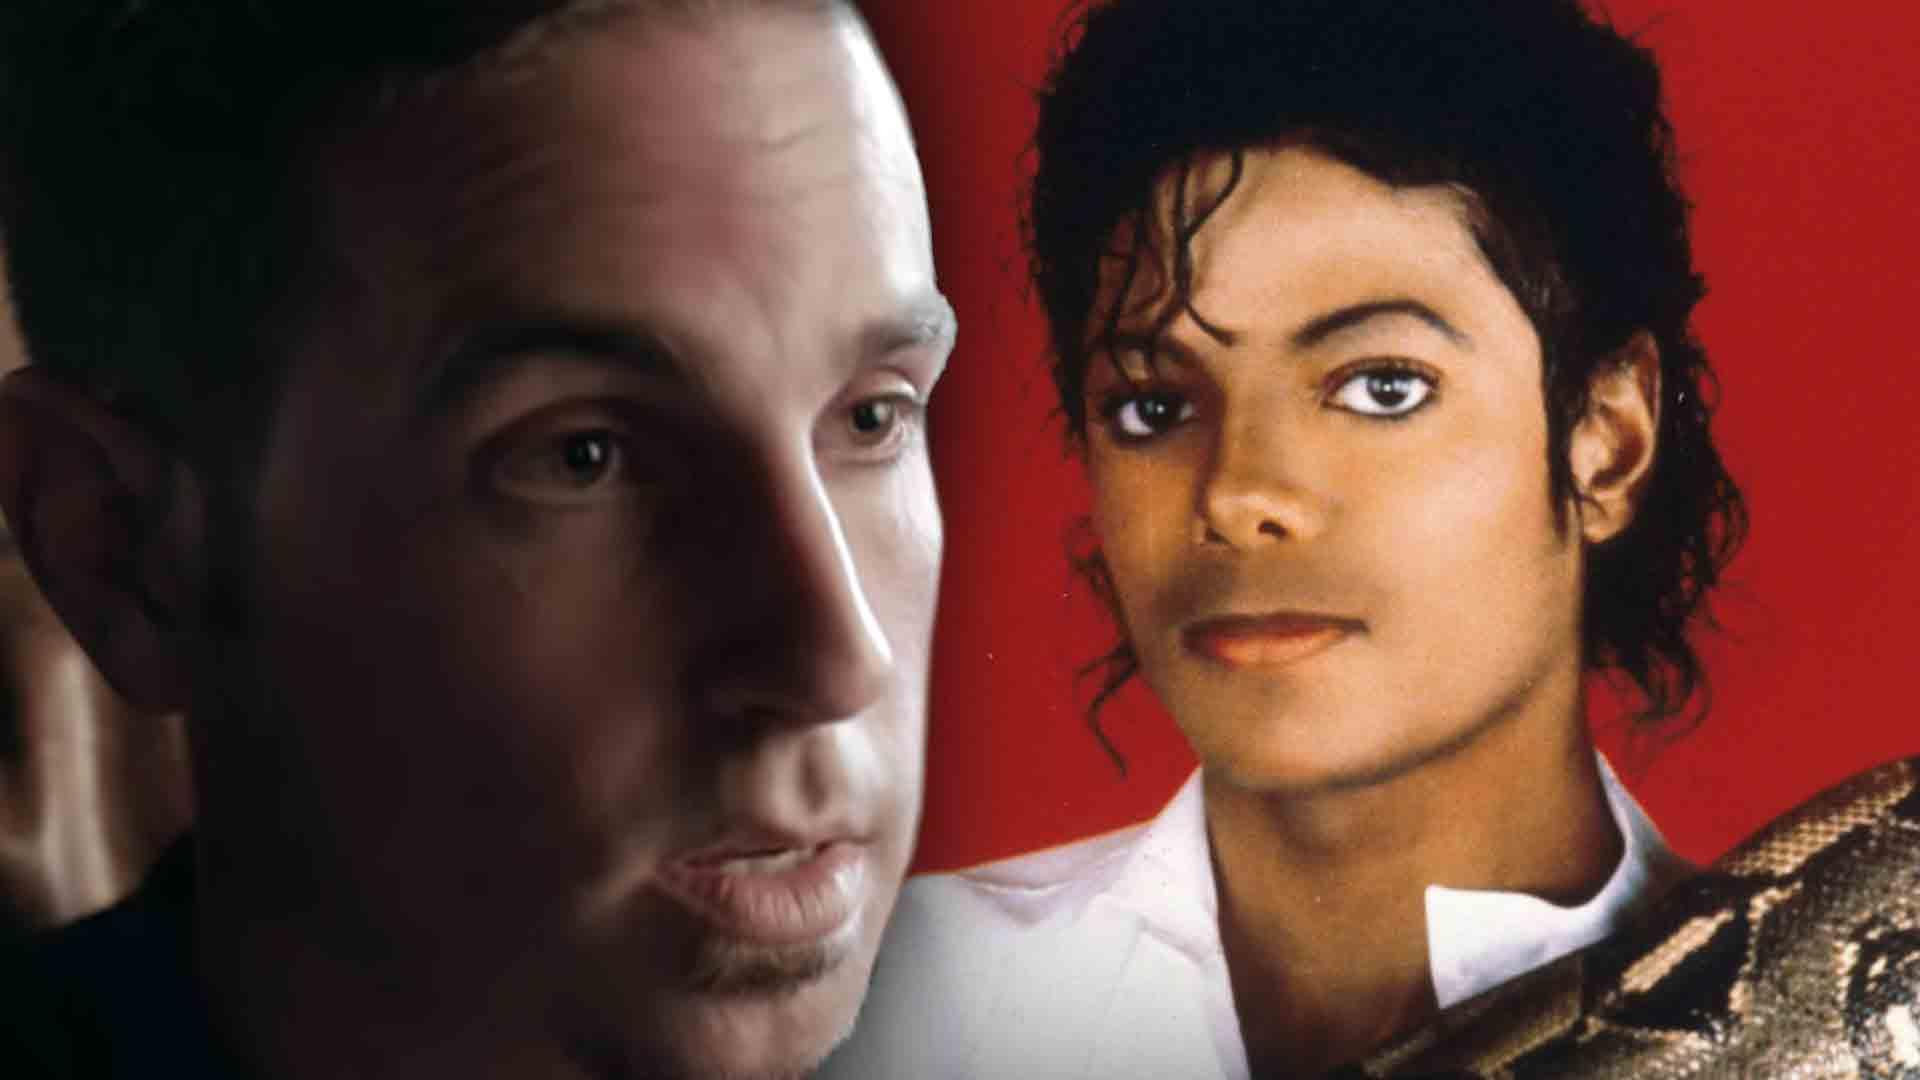 Michael Jackson Accuser Tried to Sell Memorabilia Anonymously, Auction House Wouldn’t Allow It